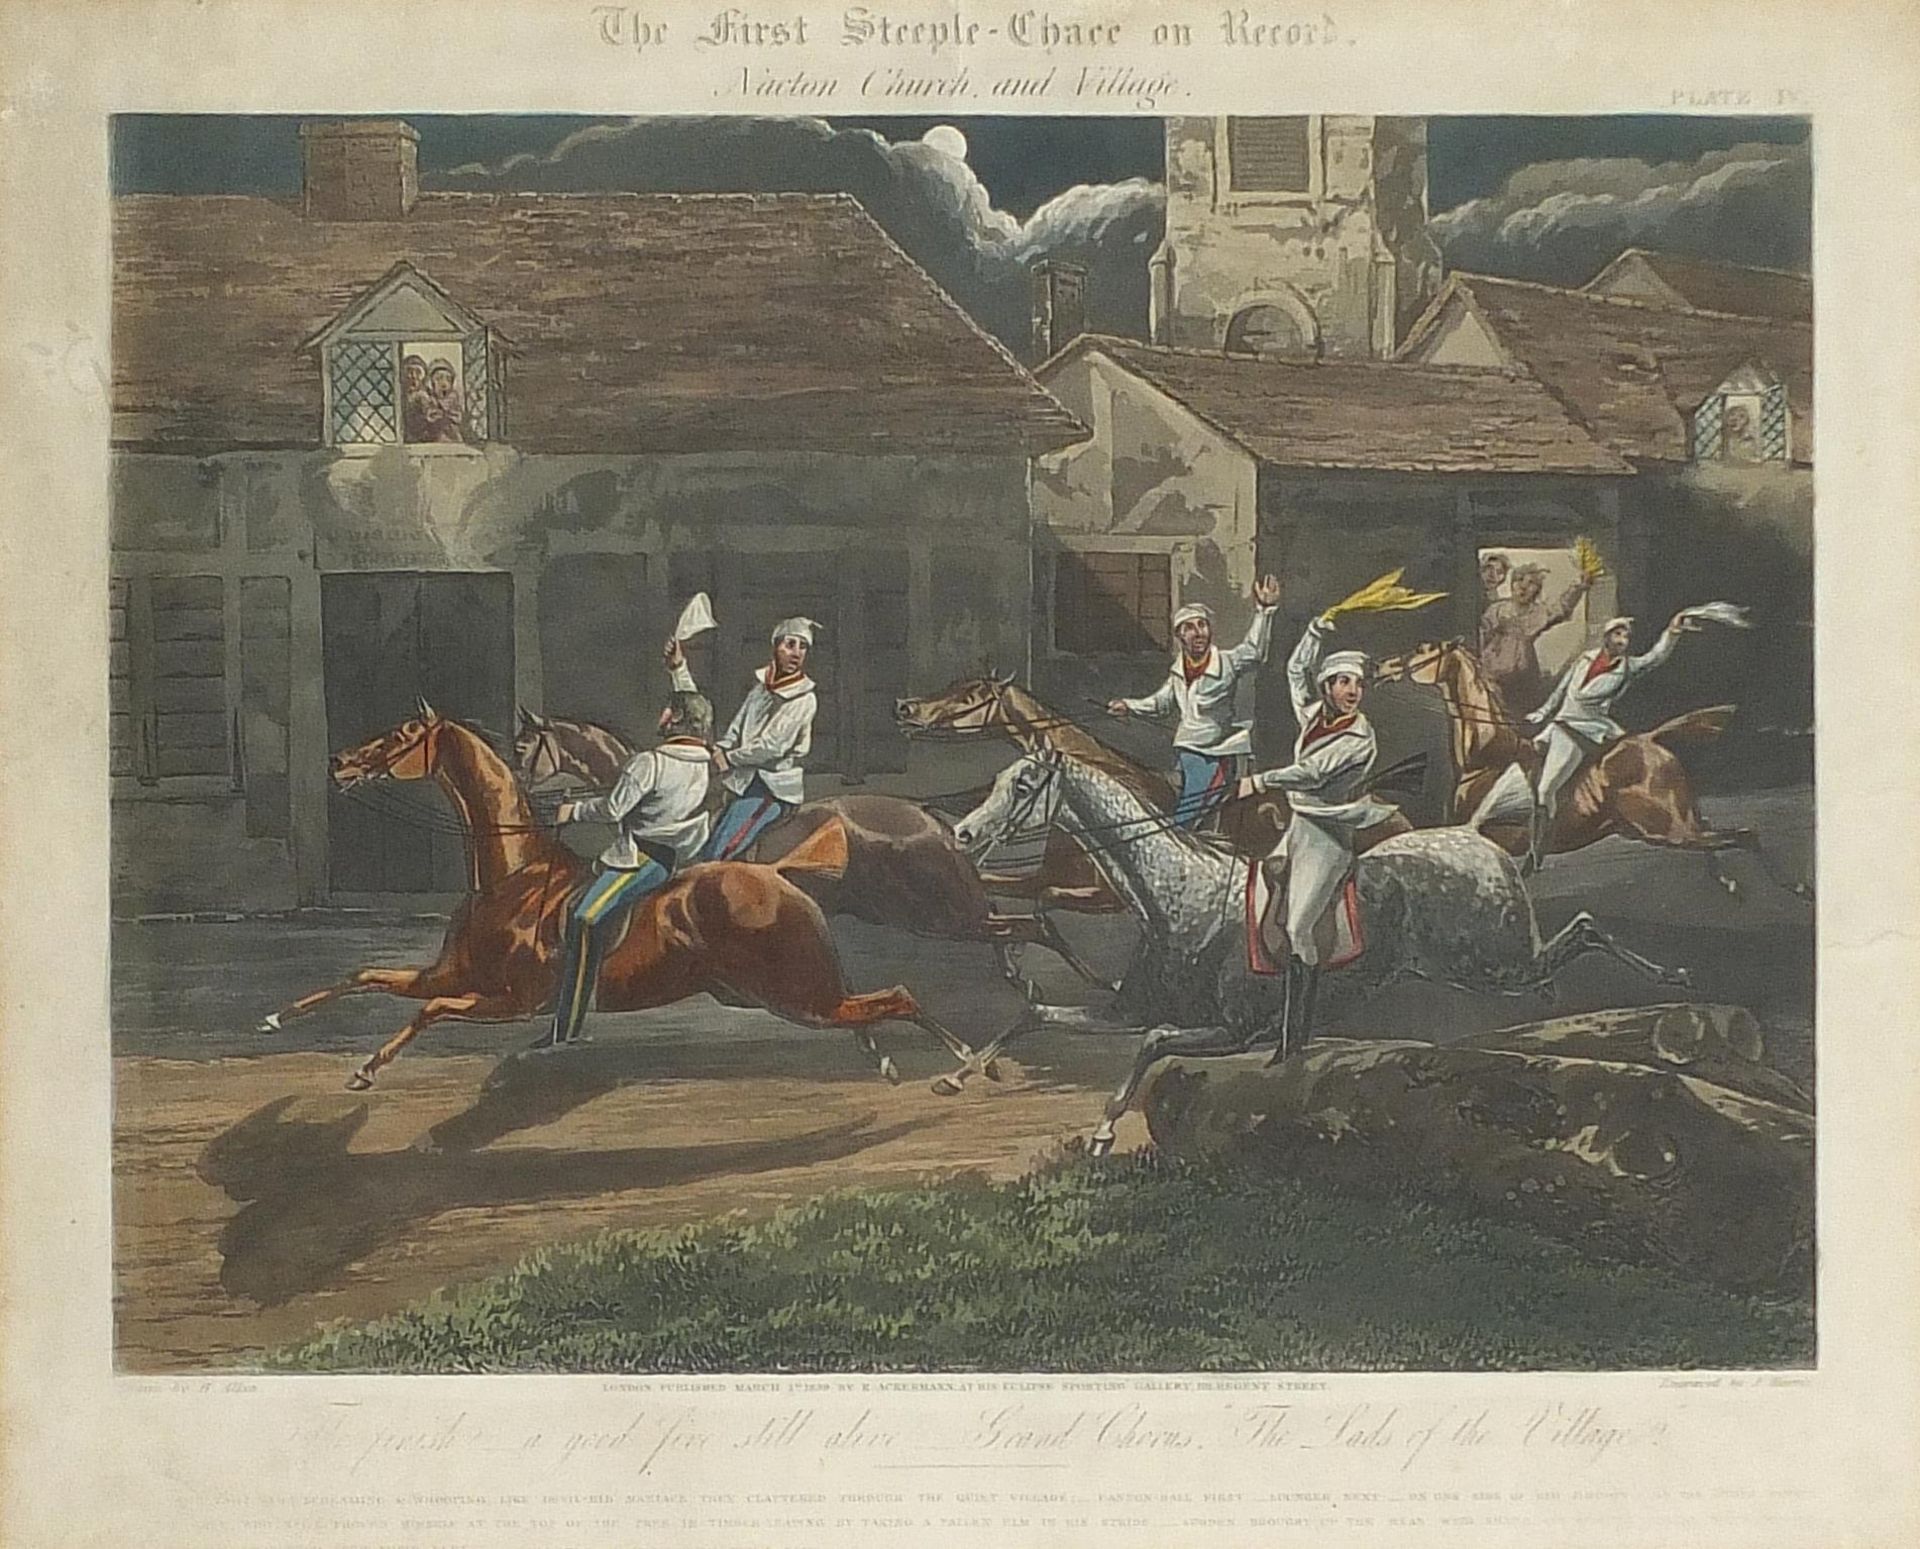 After Henry Alken - The First Steeplechase on Record, Nacton Church and Village, 19th century